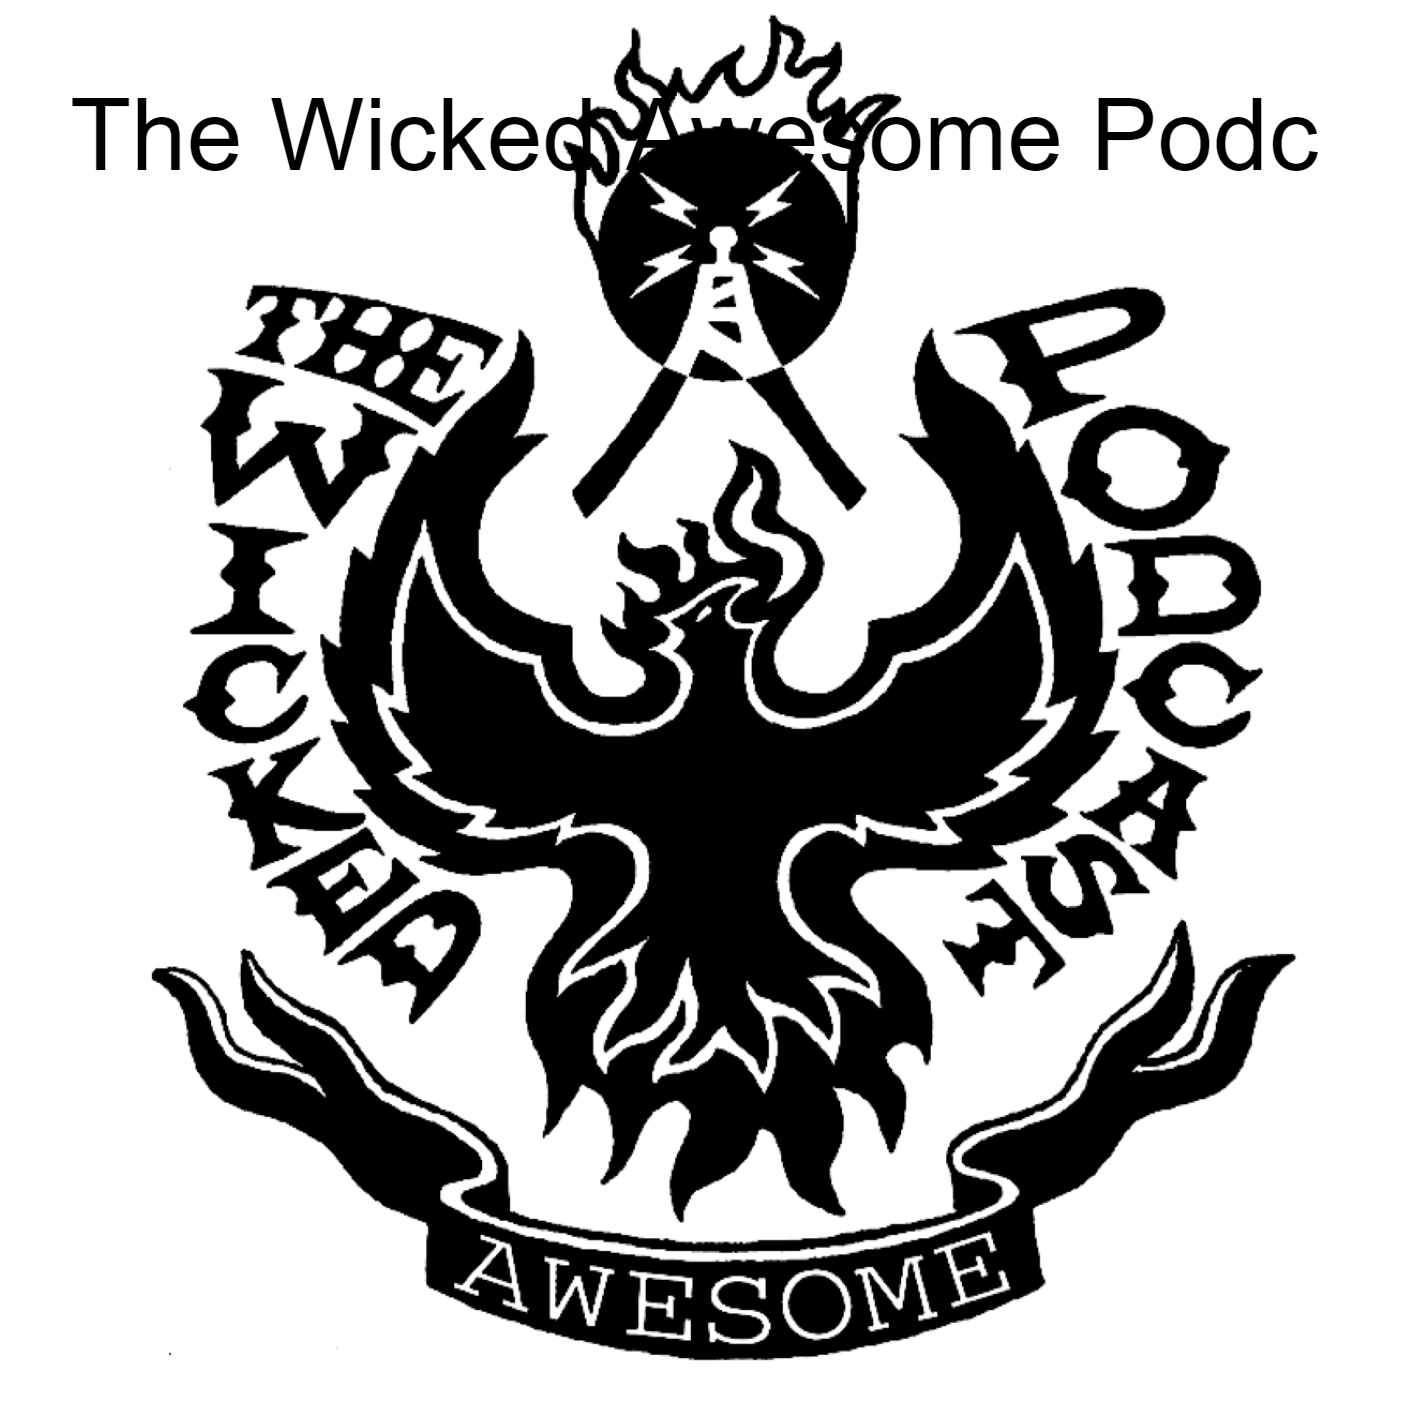 The Wicked Awesome Podcast